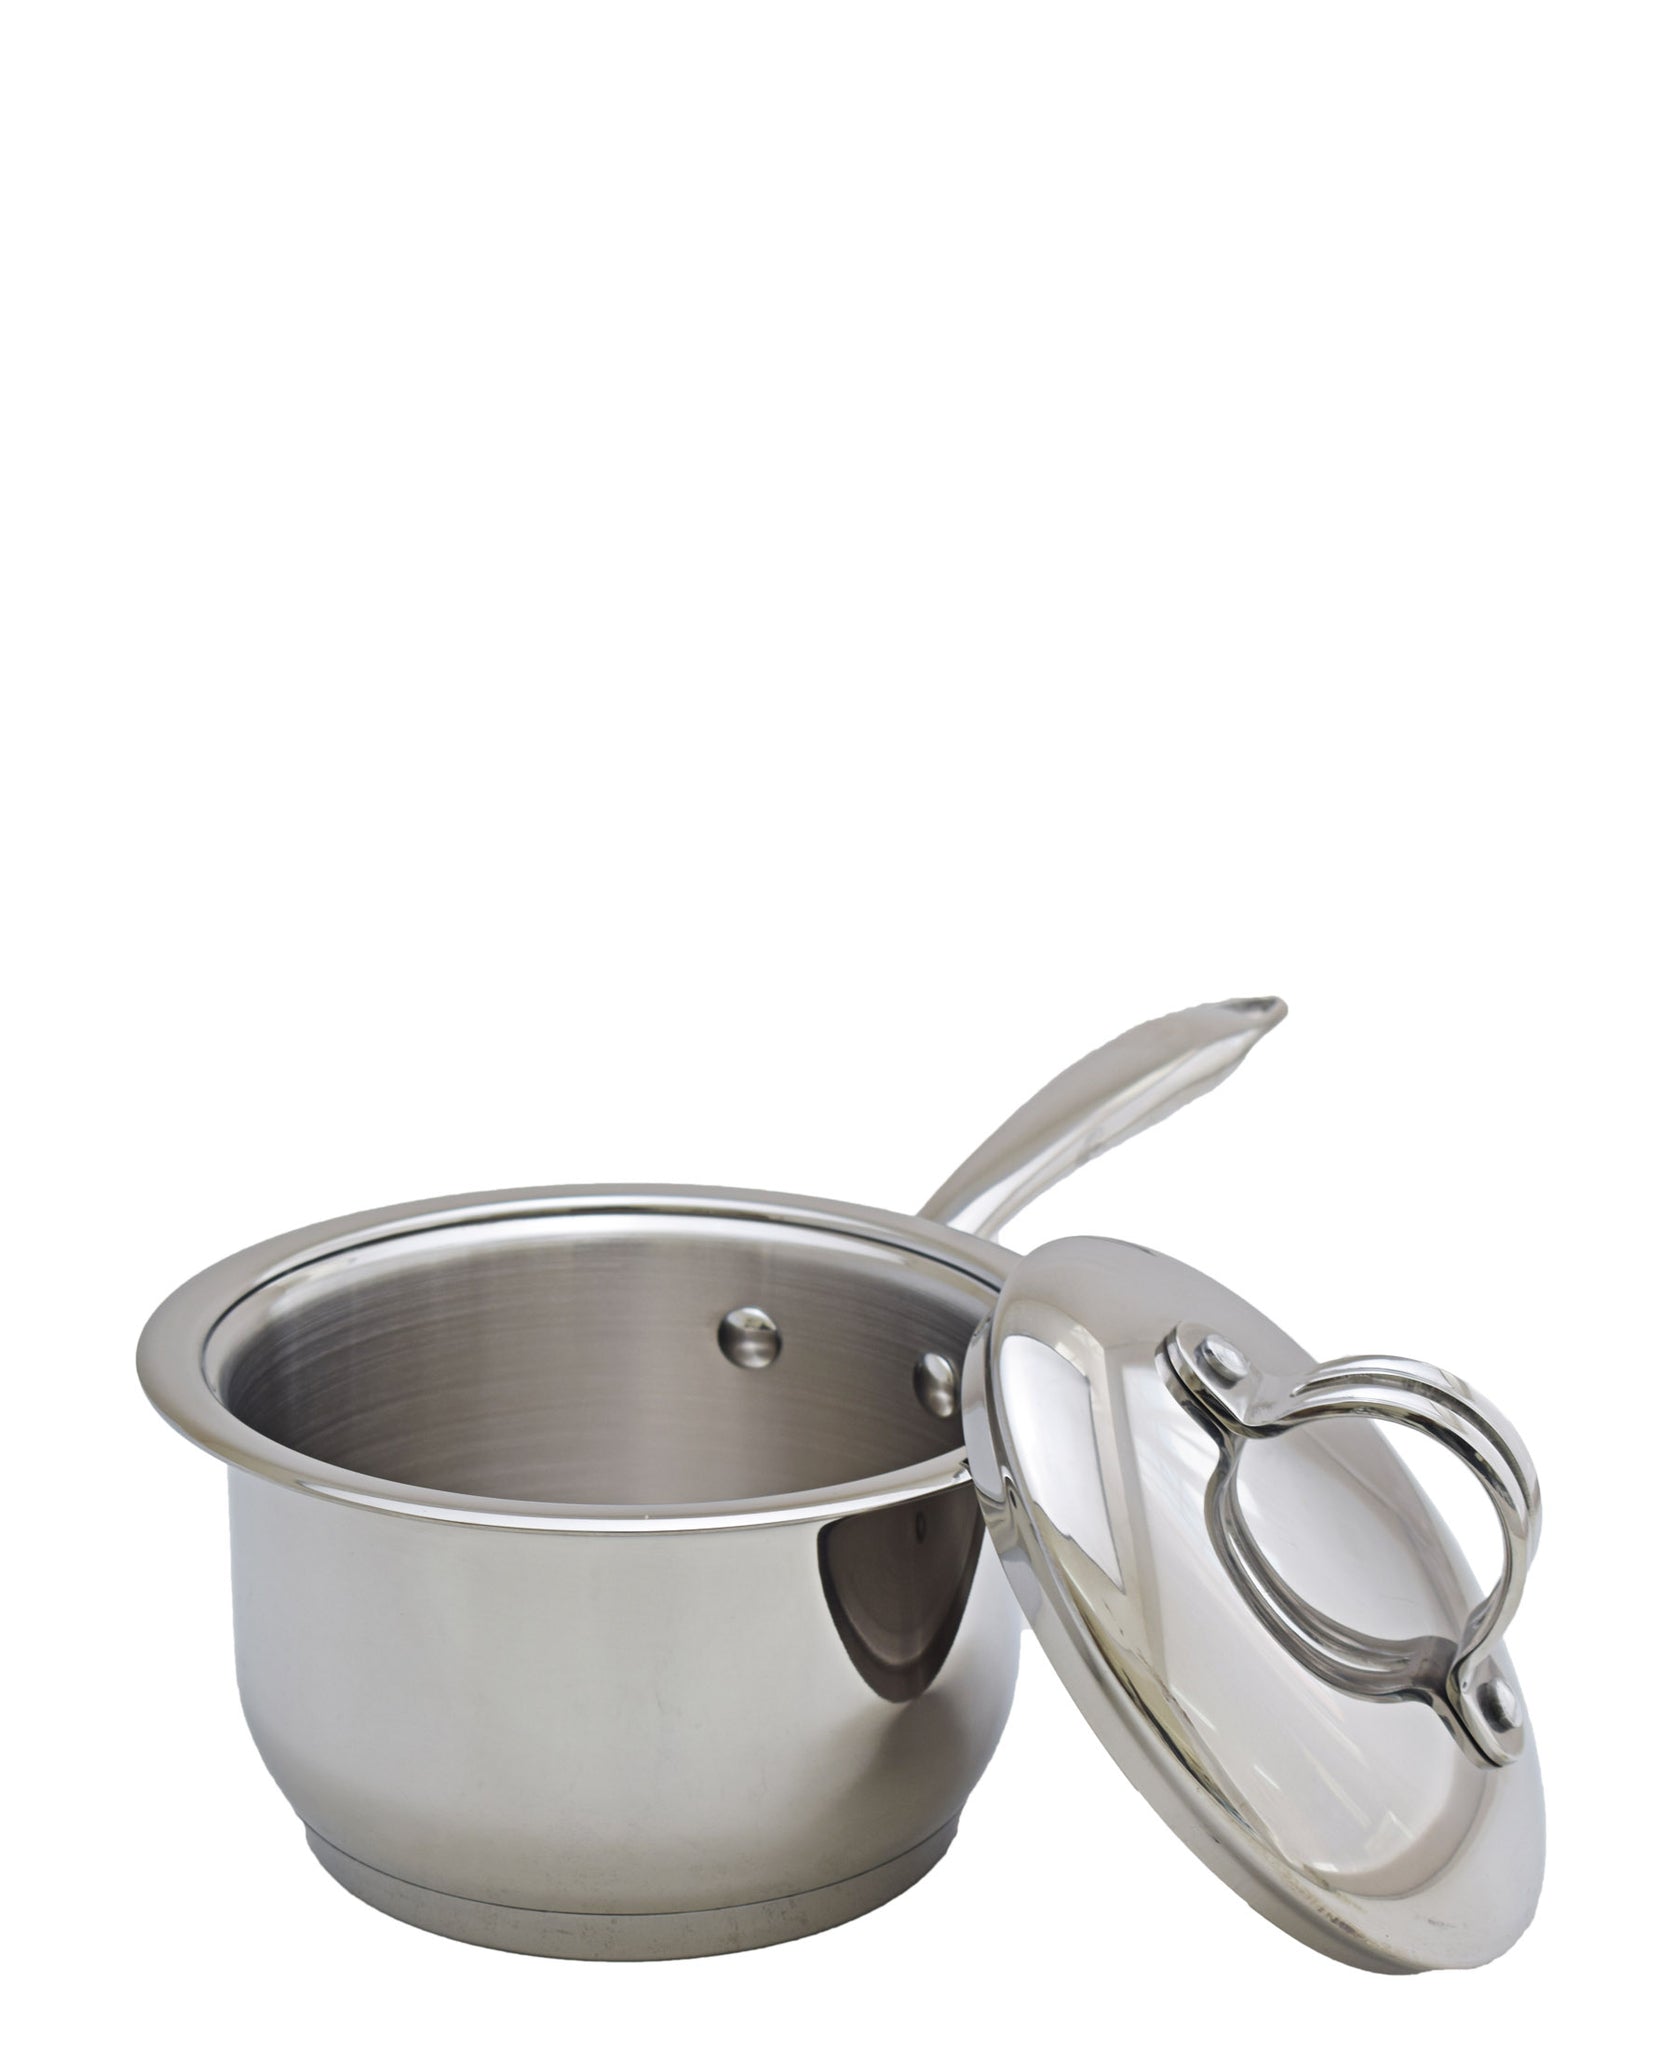 Tez 16cm Sauce Pan With Lid - Silver